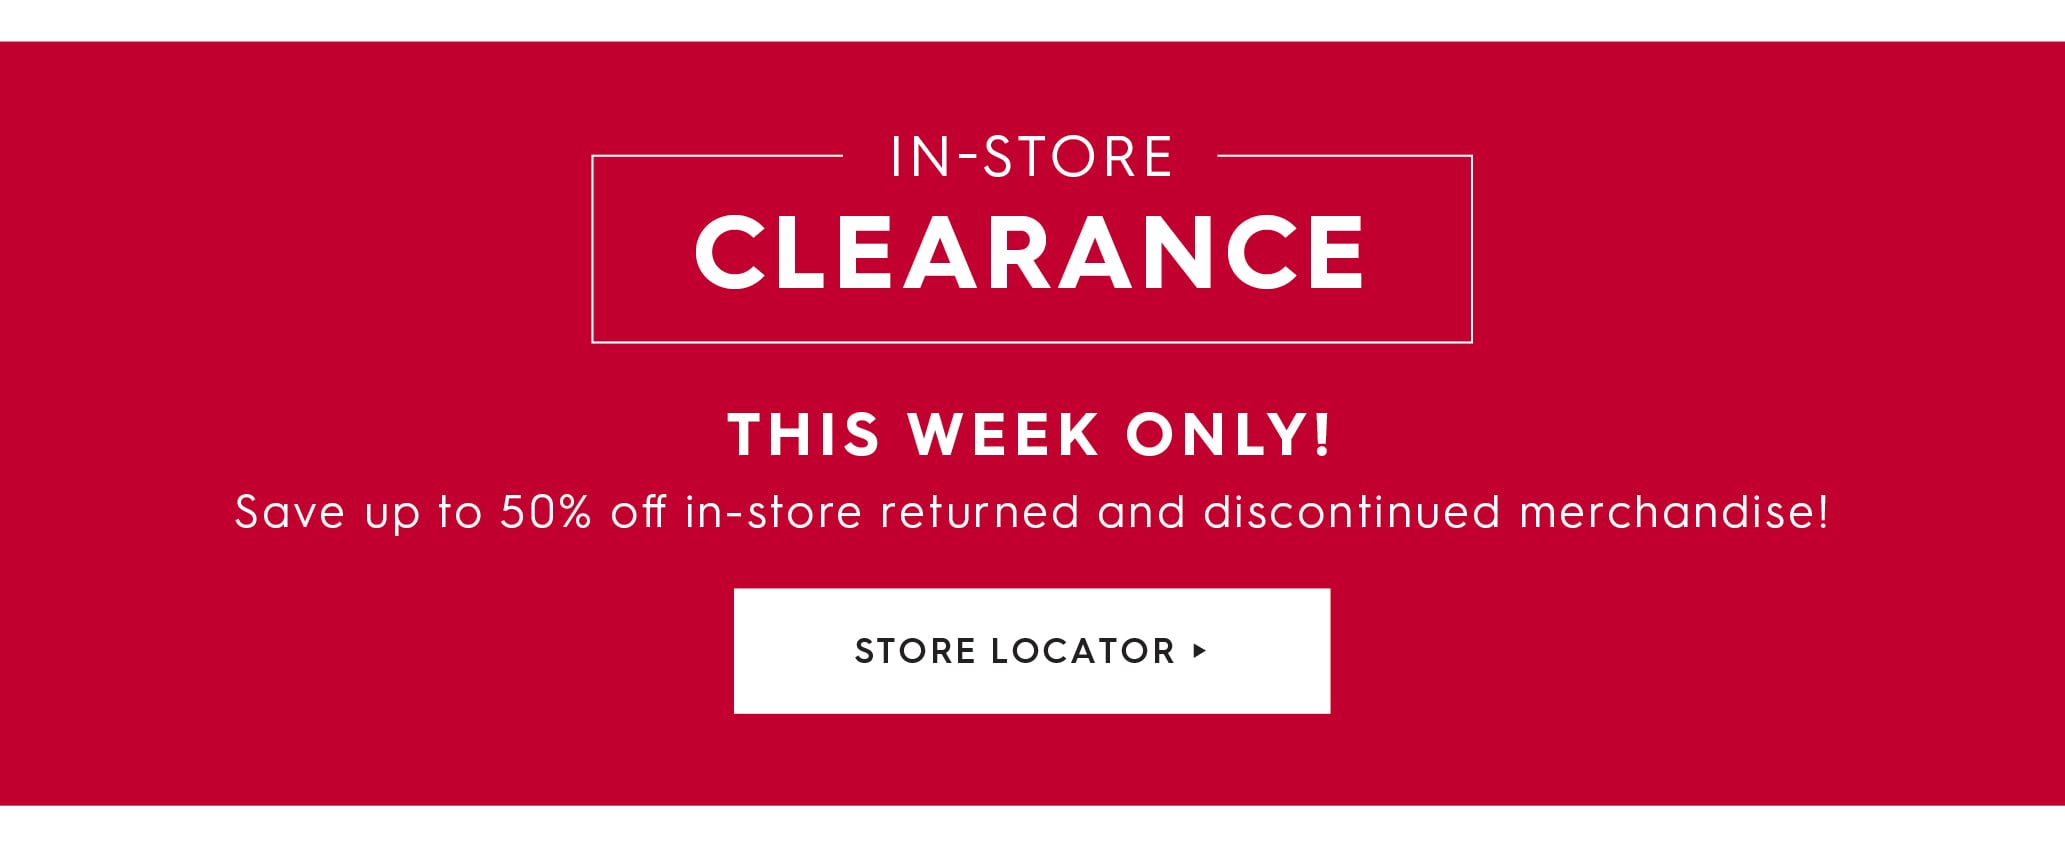 Find a clearance location.